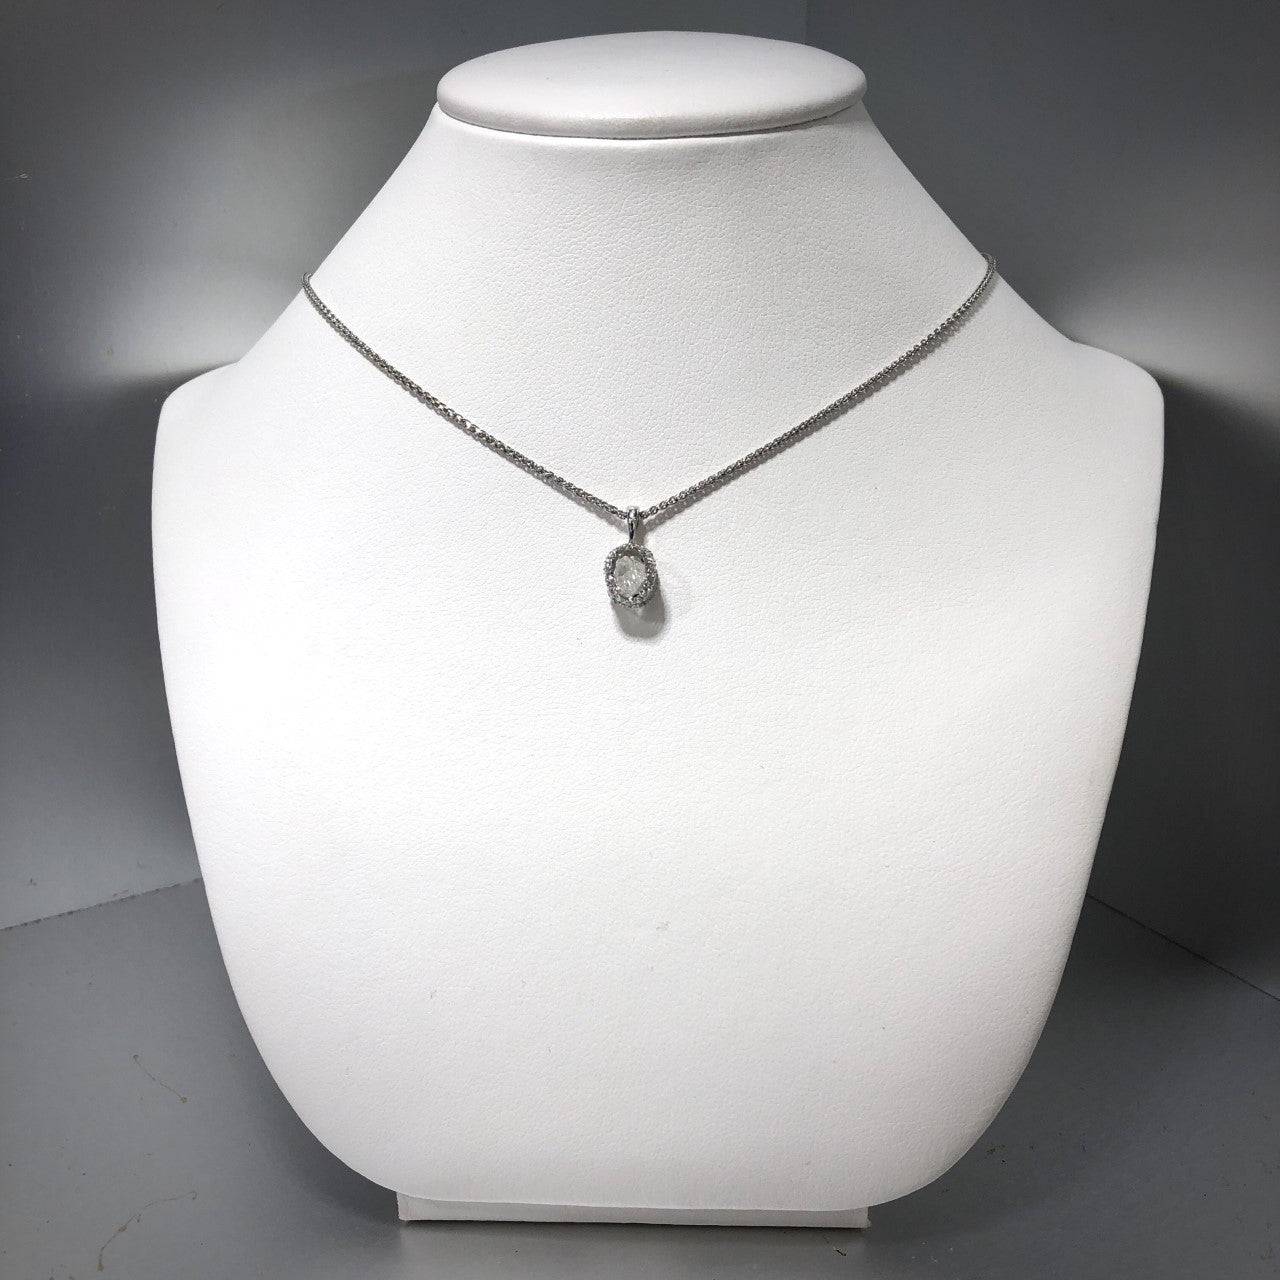 18KW Canadian Diamond Pendant With A 1.13ct Rough Diamond (Chain Included)